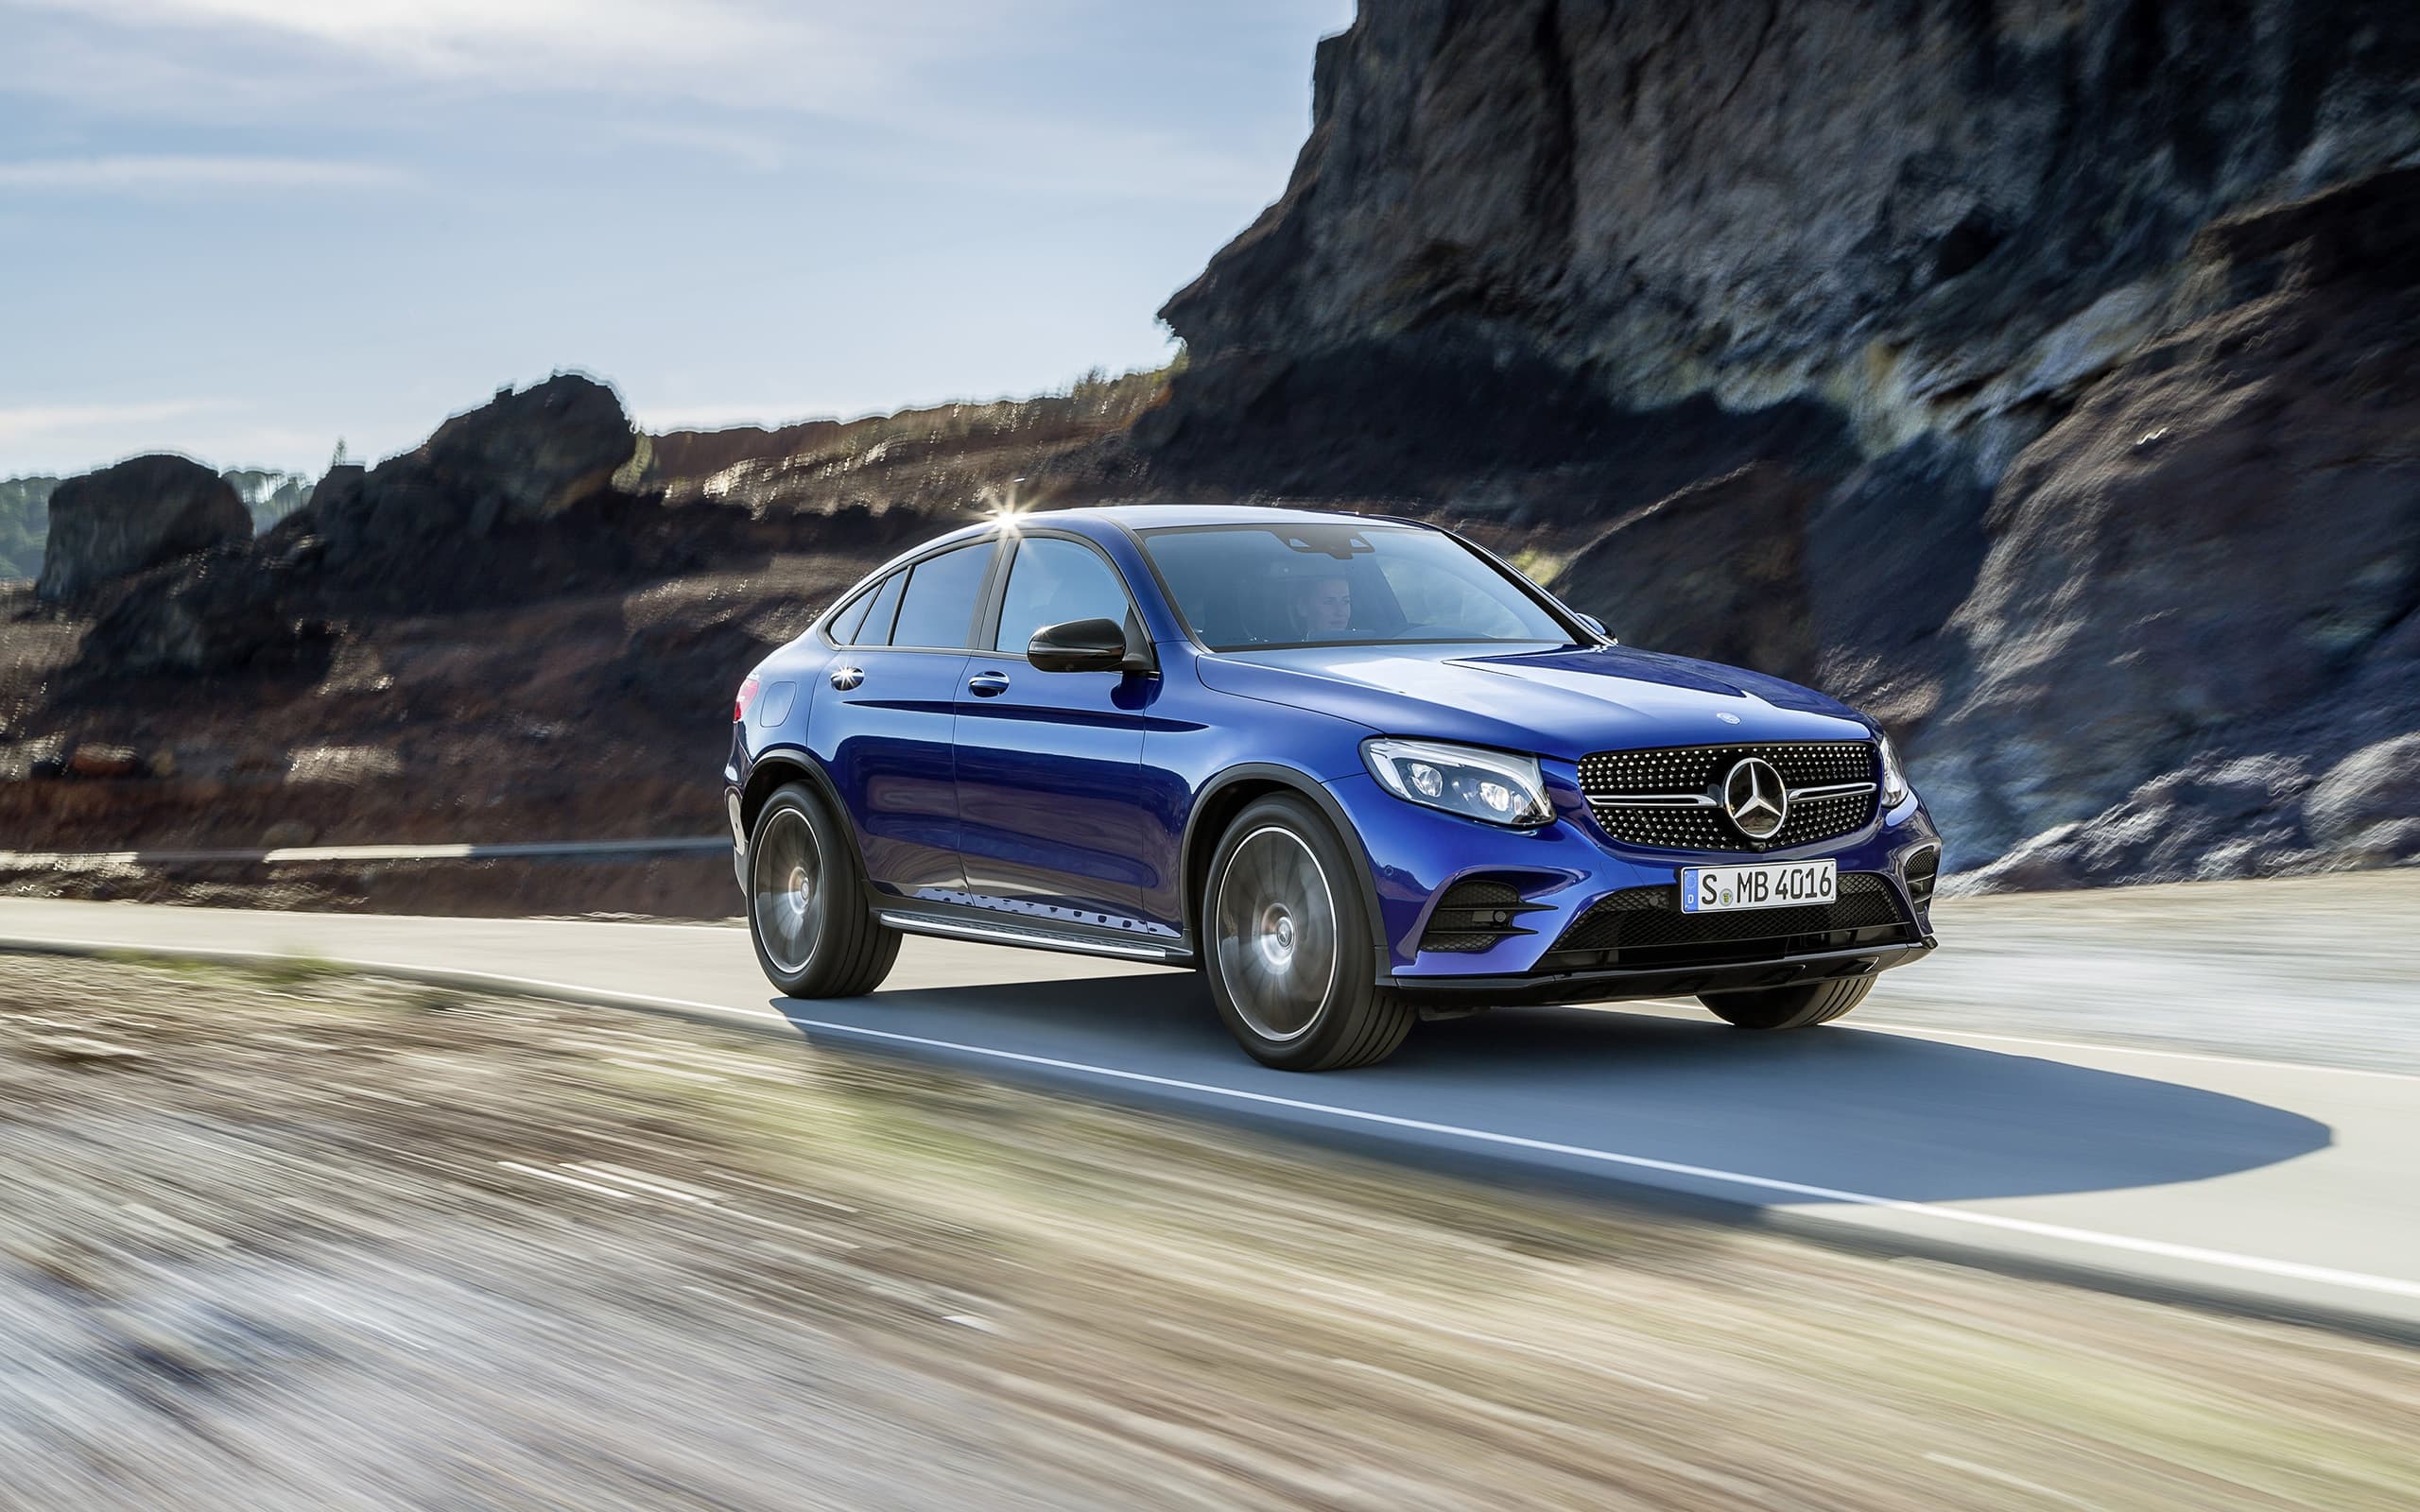 Mercedes Benz GLC Coupe Wallpaper, Image High Resolution